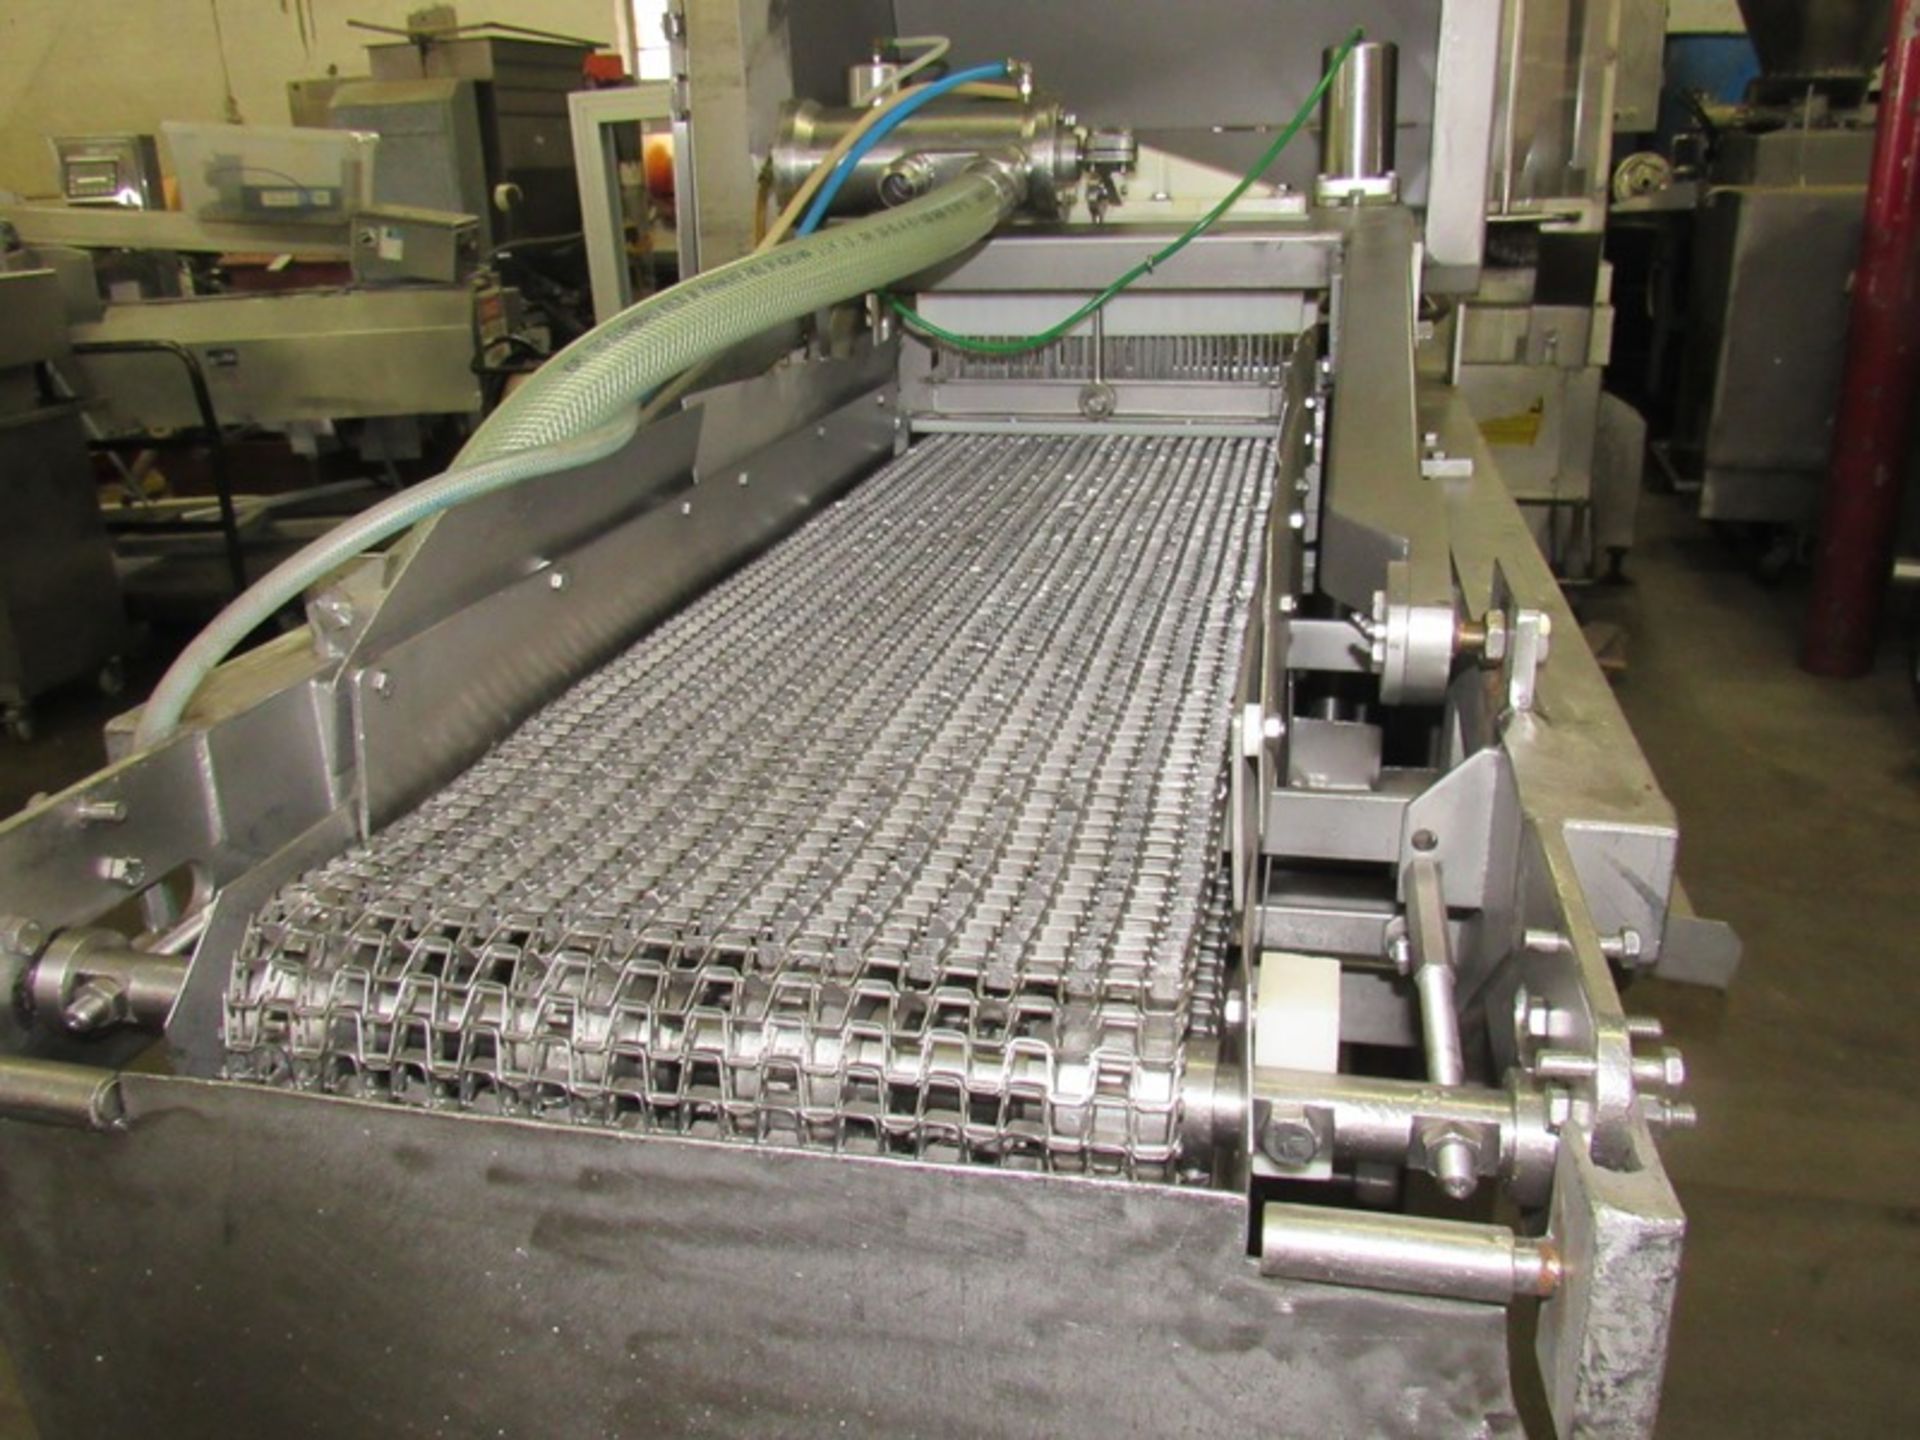 Townsend Mdl. 1450 Injector, 170 needle, 14" W X 6' H stainless steel belt conveyor with stainless - Image 10 of 18